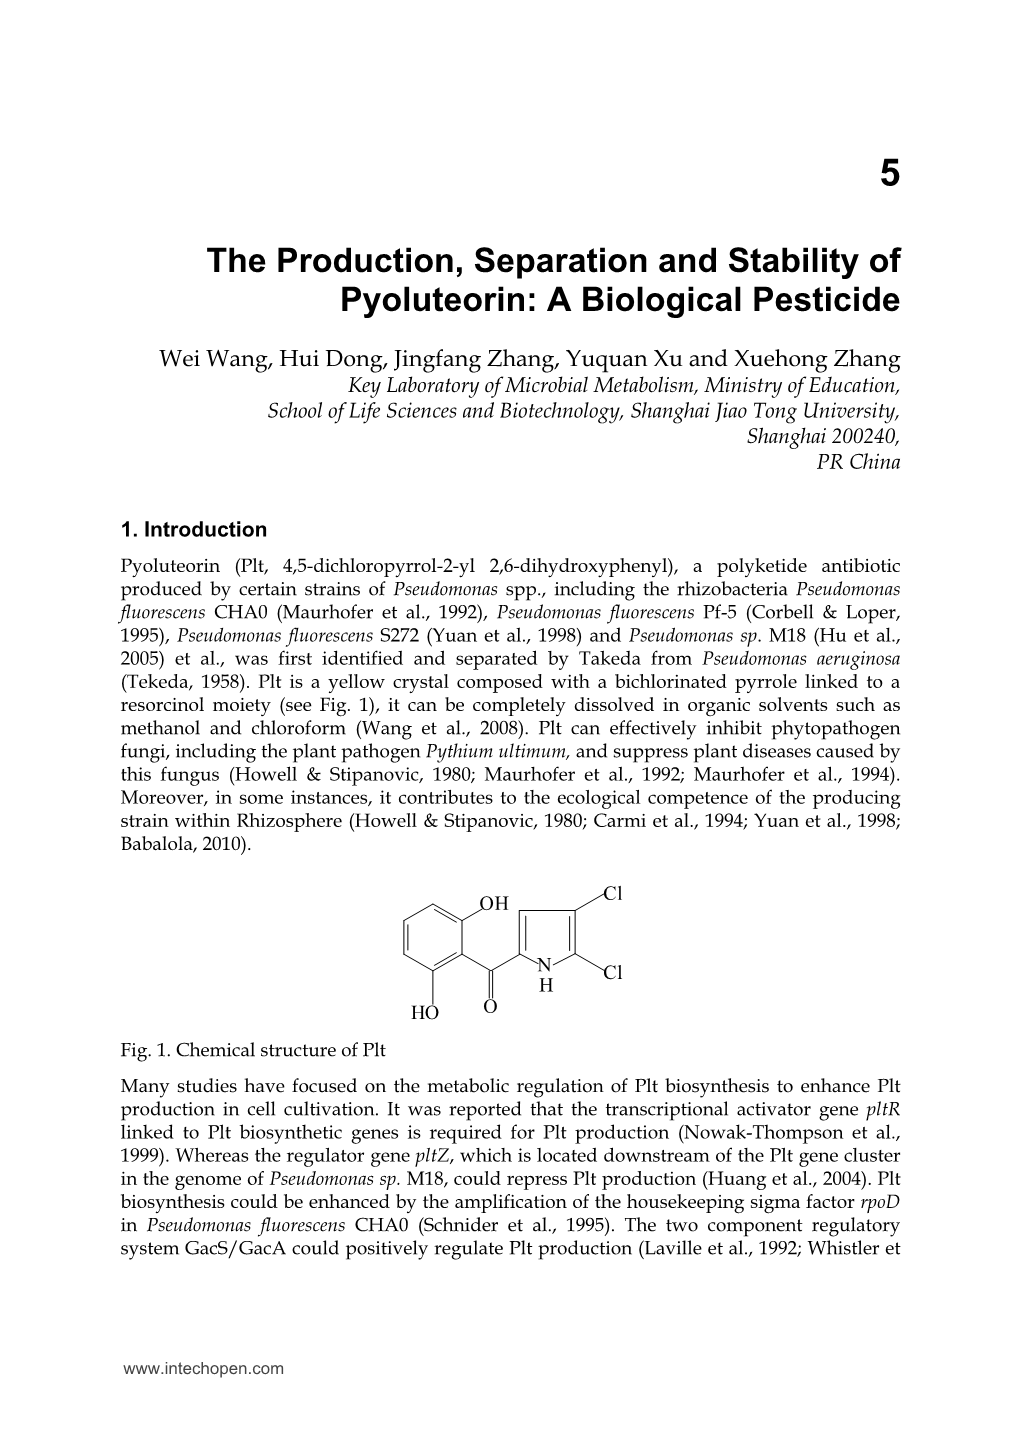 The Production, Separation and Stability of Pyoluteorin: a Biological Pesticide